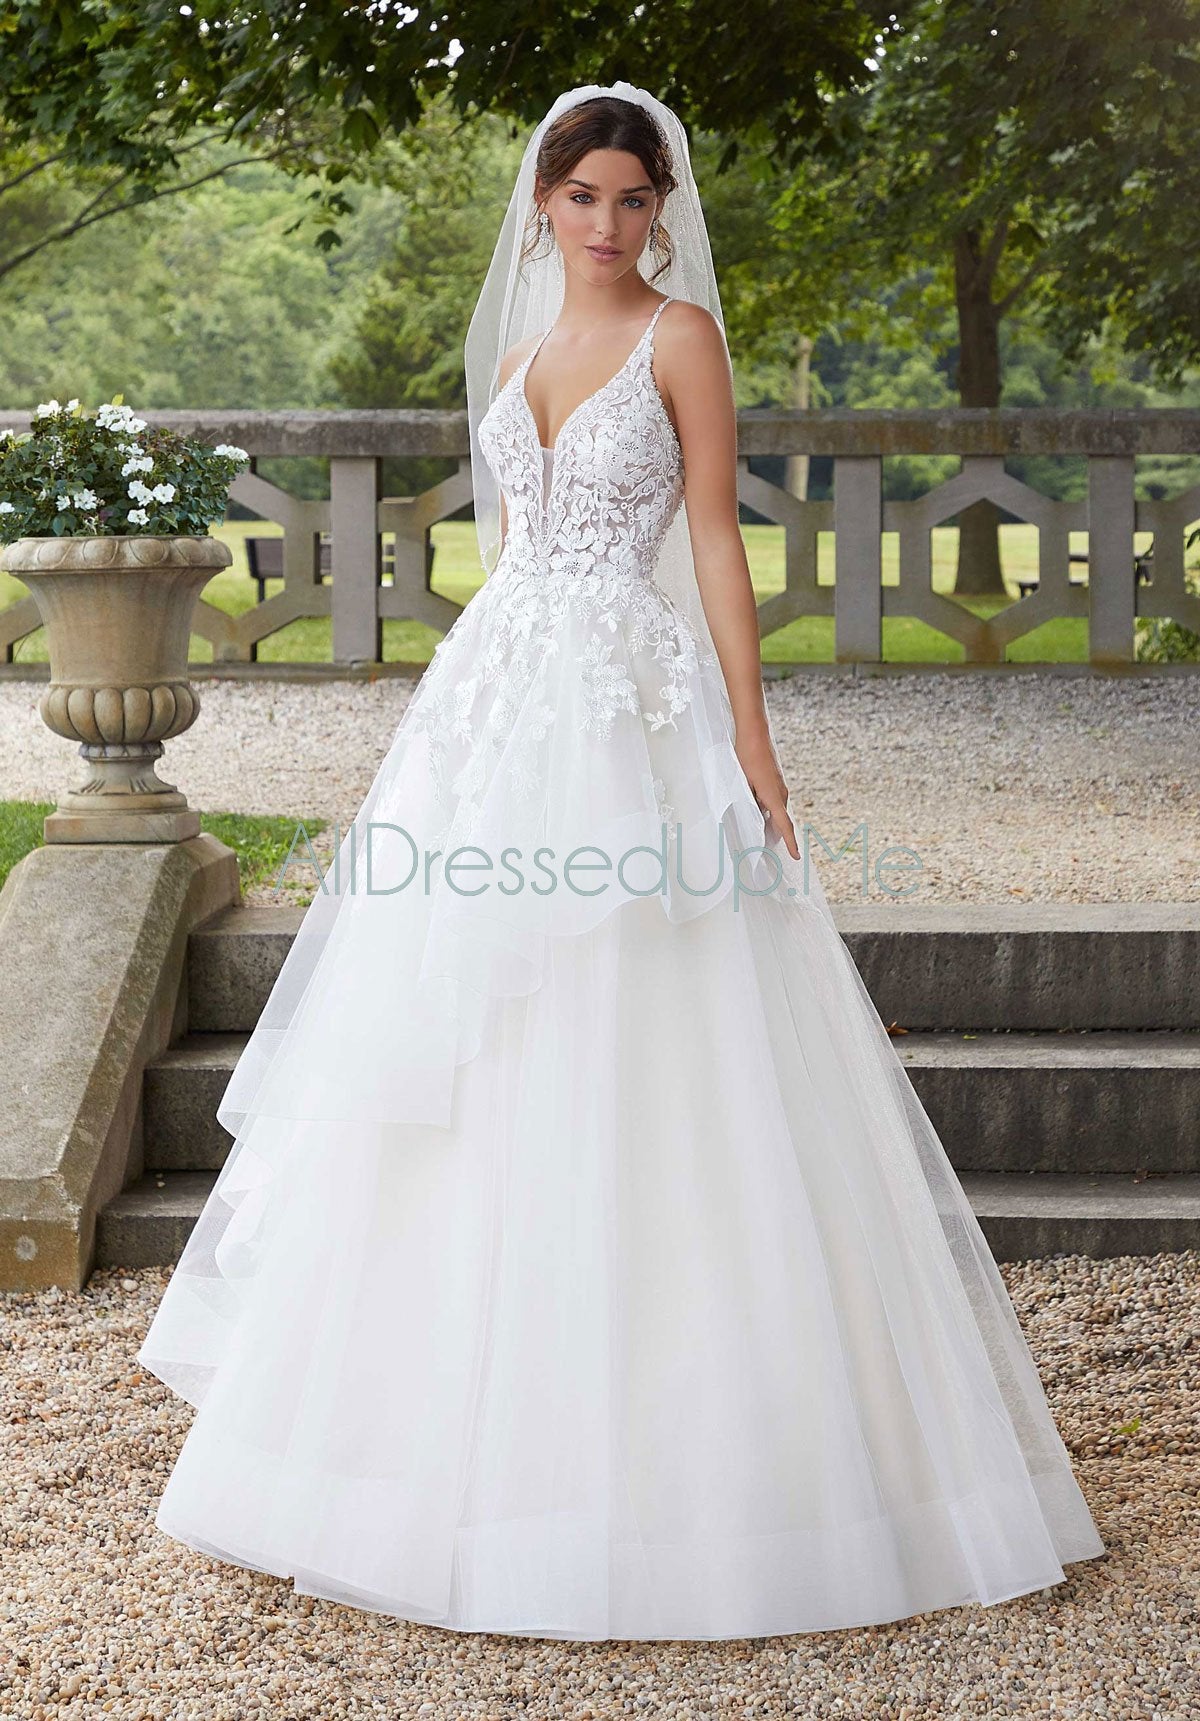 Blu - Sahara - 5811 - Cheron's Bridal, Wedding Gown - Morilee Blu - - Wedding Gowns Dresses Chattanooga Hixson Shops Boutiques Tennessee TN Georgia GA MSRP Lowest Prices Sale Discount